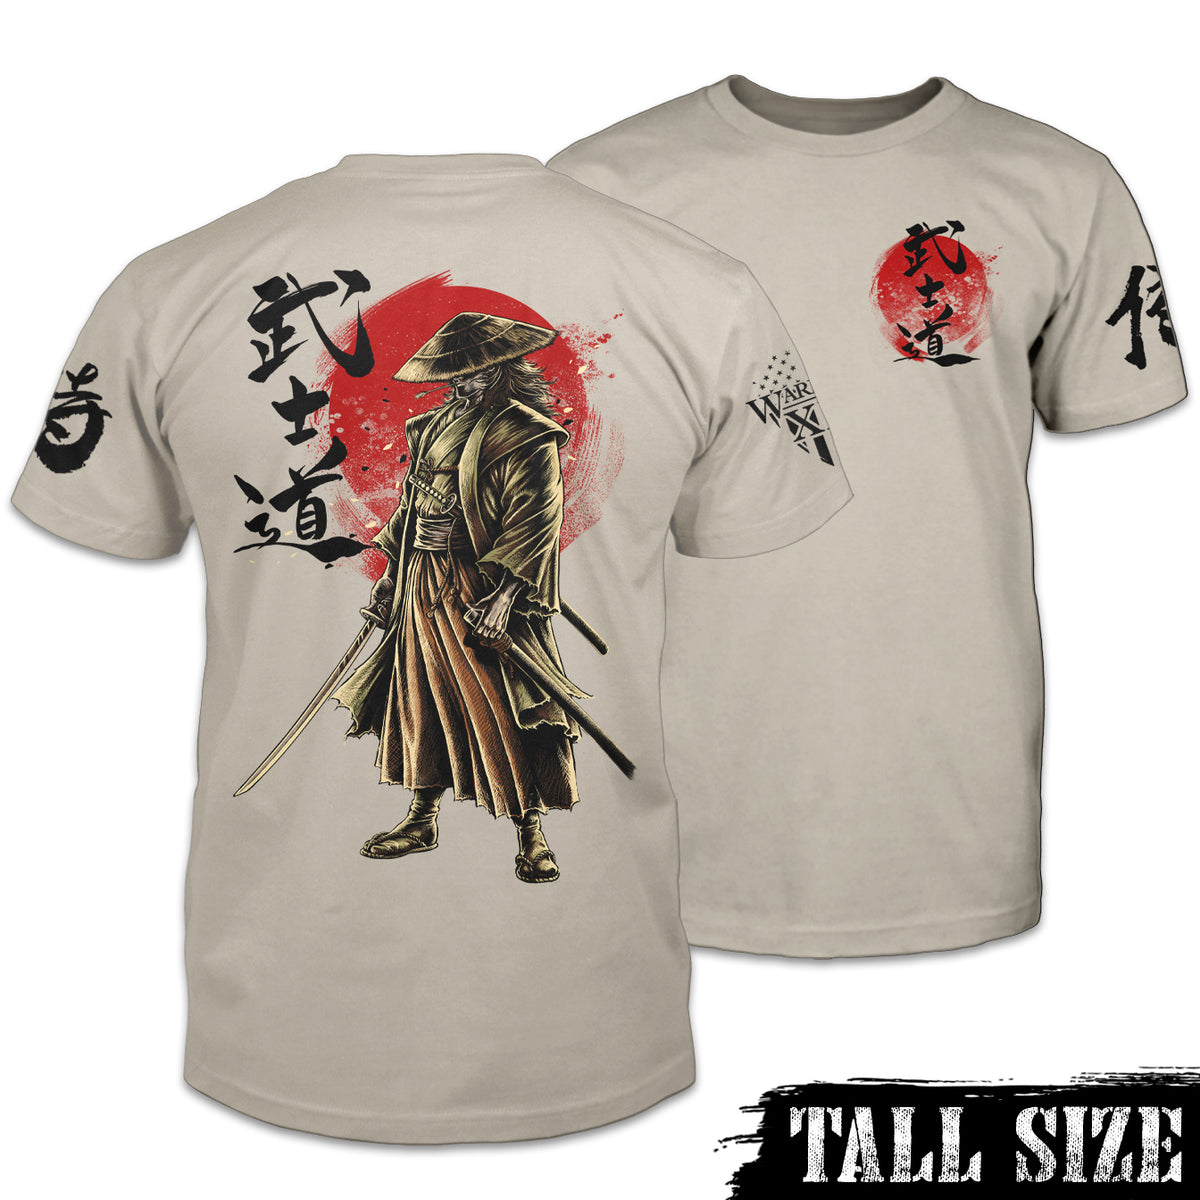 Front and back shirt with a samurai warrior printed on the back of a light tan tall sized shirt.